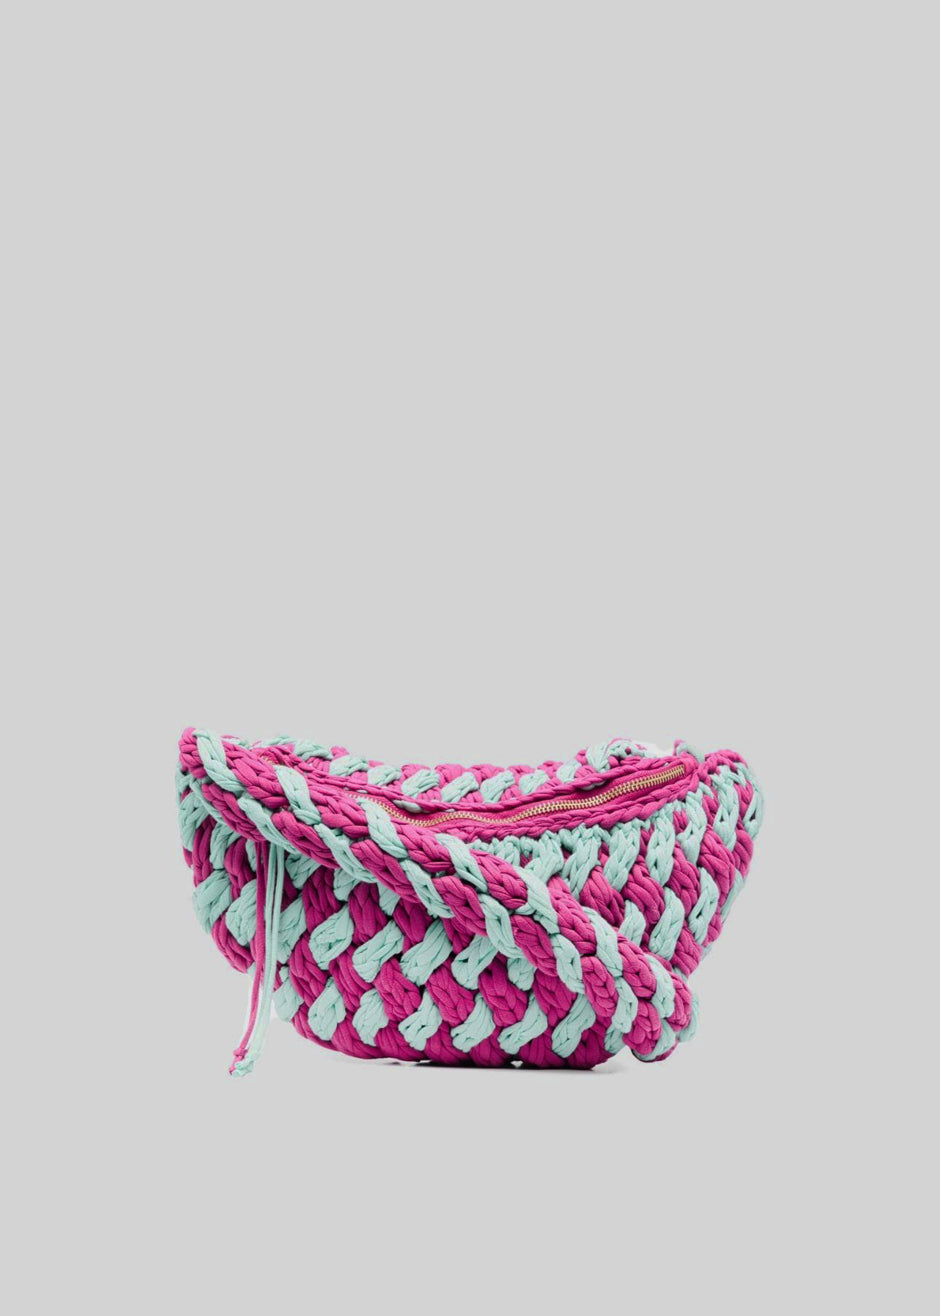 JW Anderson Knitted Bum Bag - Purple/Mint - 4